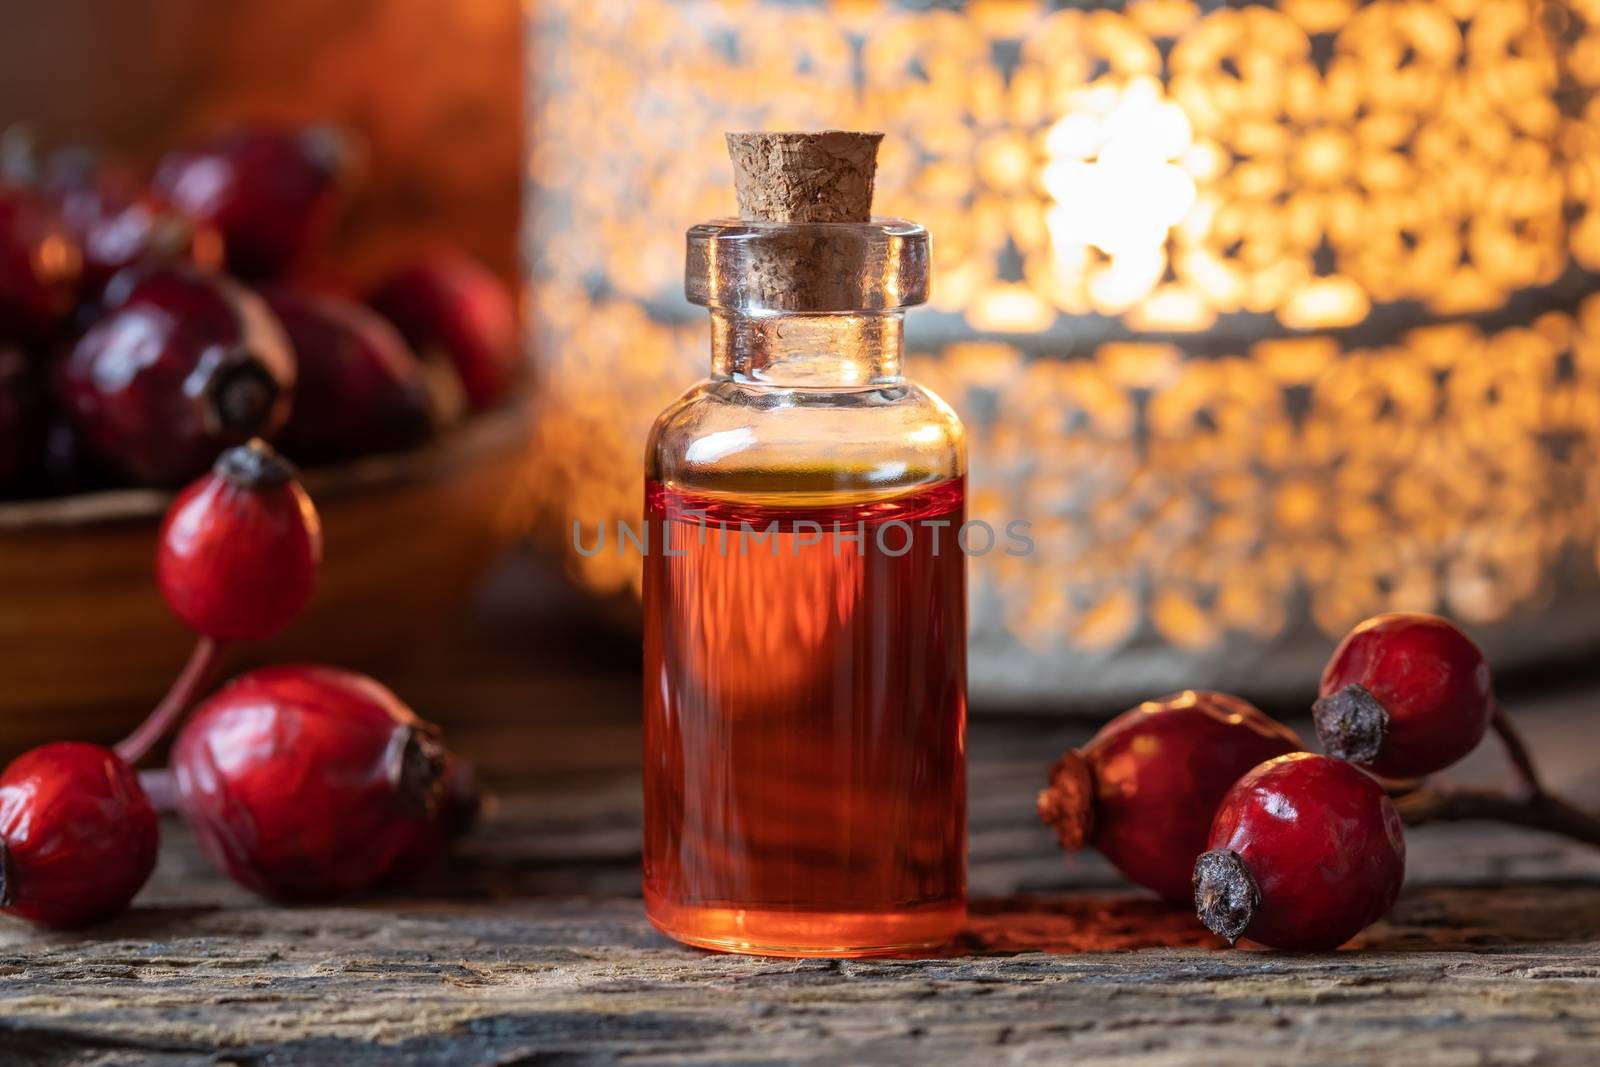 A bottle of rose hip seed oil with dried rose hips by madeleine_steinbach